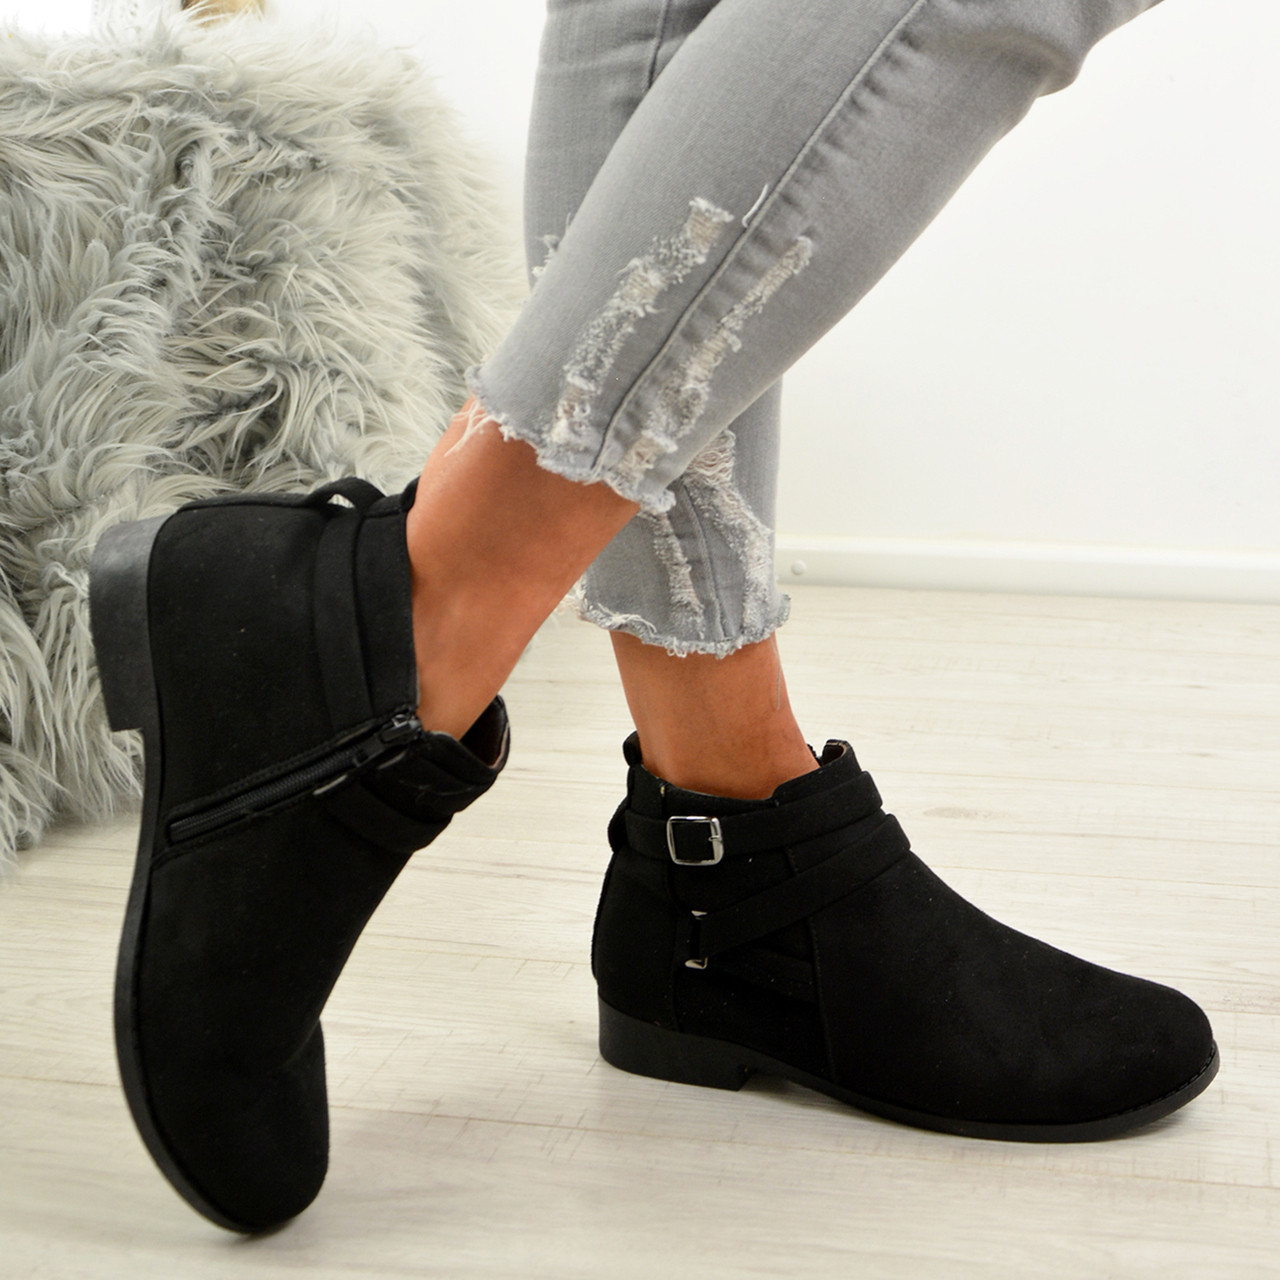 Ladies Womens Ankle Boots Low Heel 